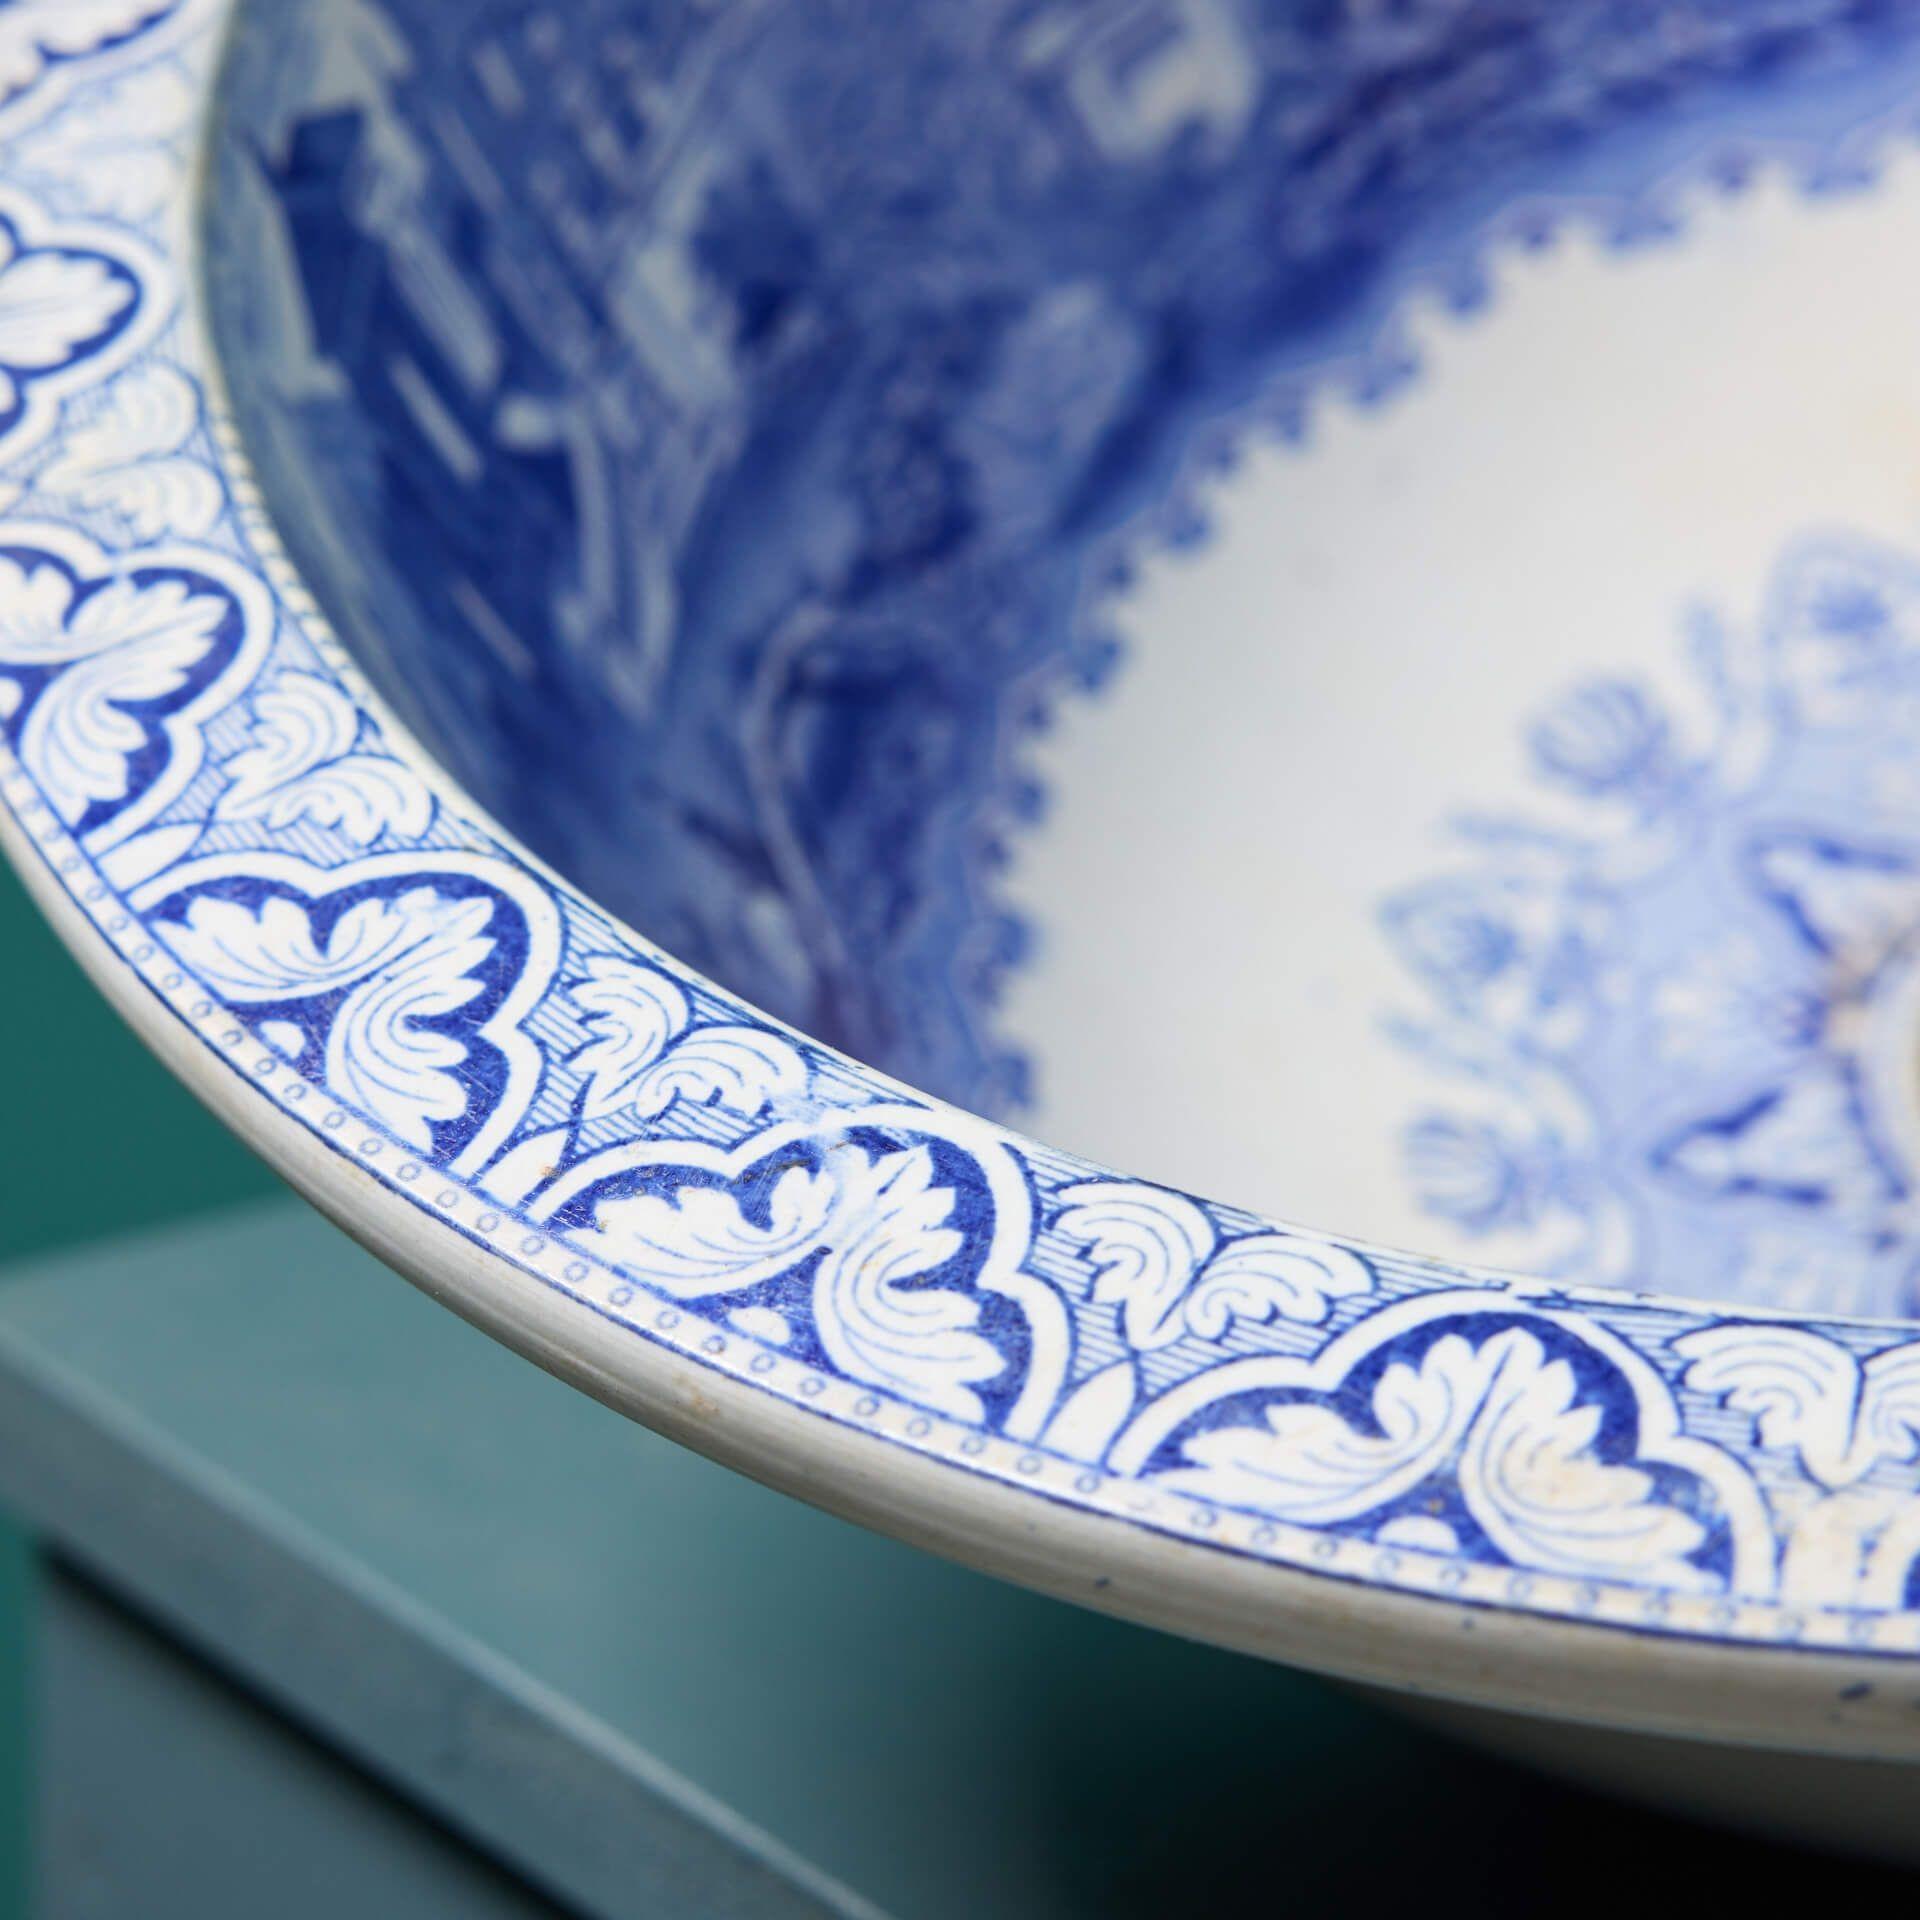 Antique Blue & White Transfer Print Bowl Sink In Fair Condition For Sale In Wormelow, Herefordshire